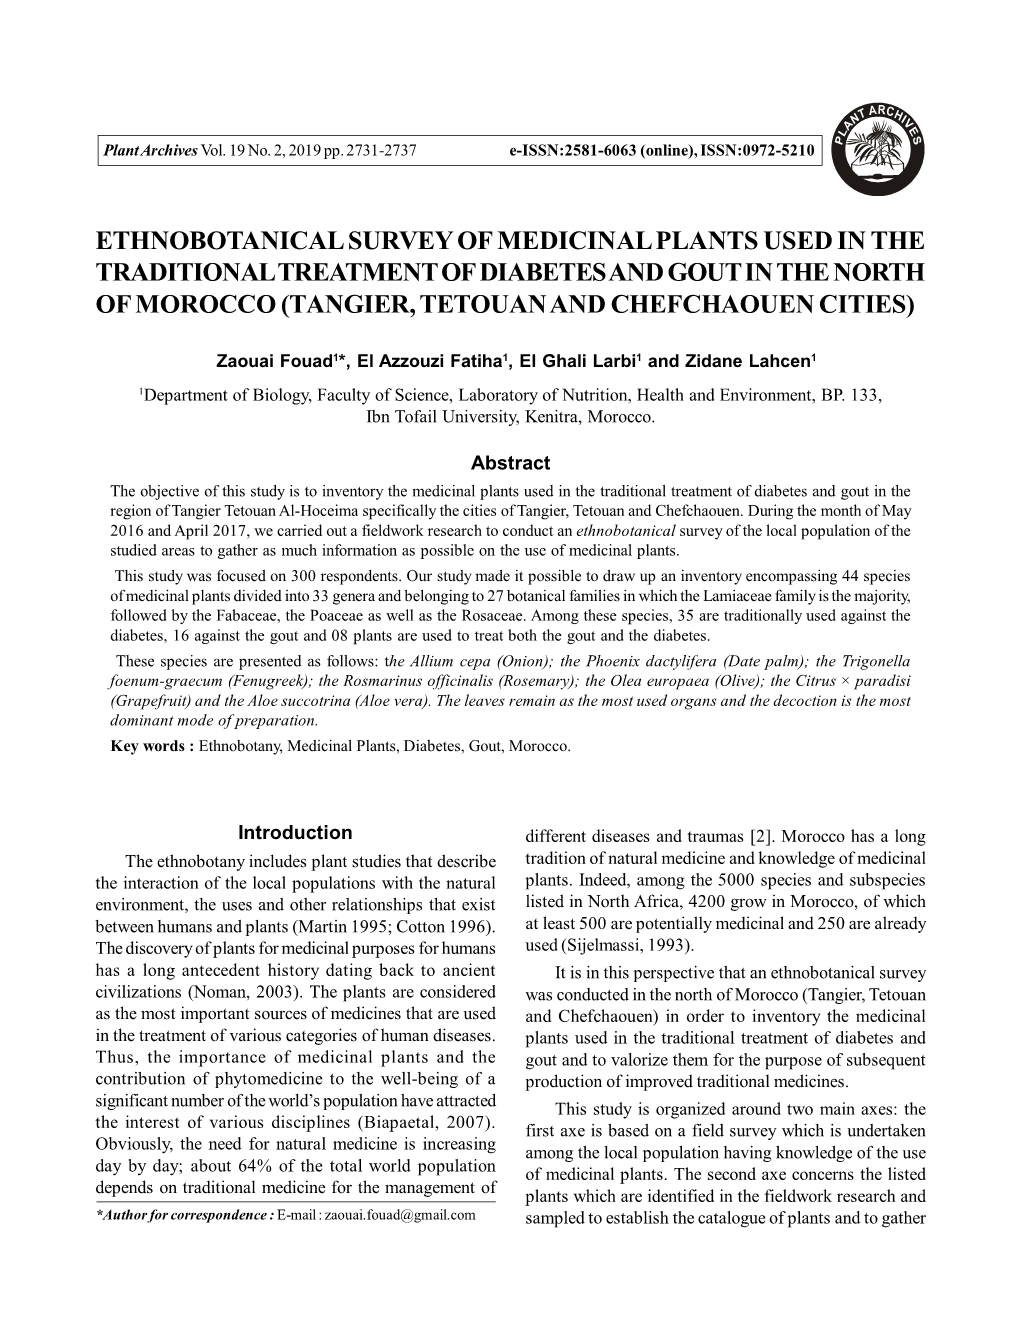 Ethnobotanical Survey of Medicinal Plants Used in the Traditional Treatment of Diabetes and Gout in the North of Morocco (Tangier, Tetouan and Chefchaouen Cities)